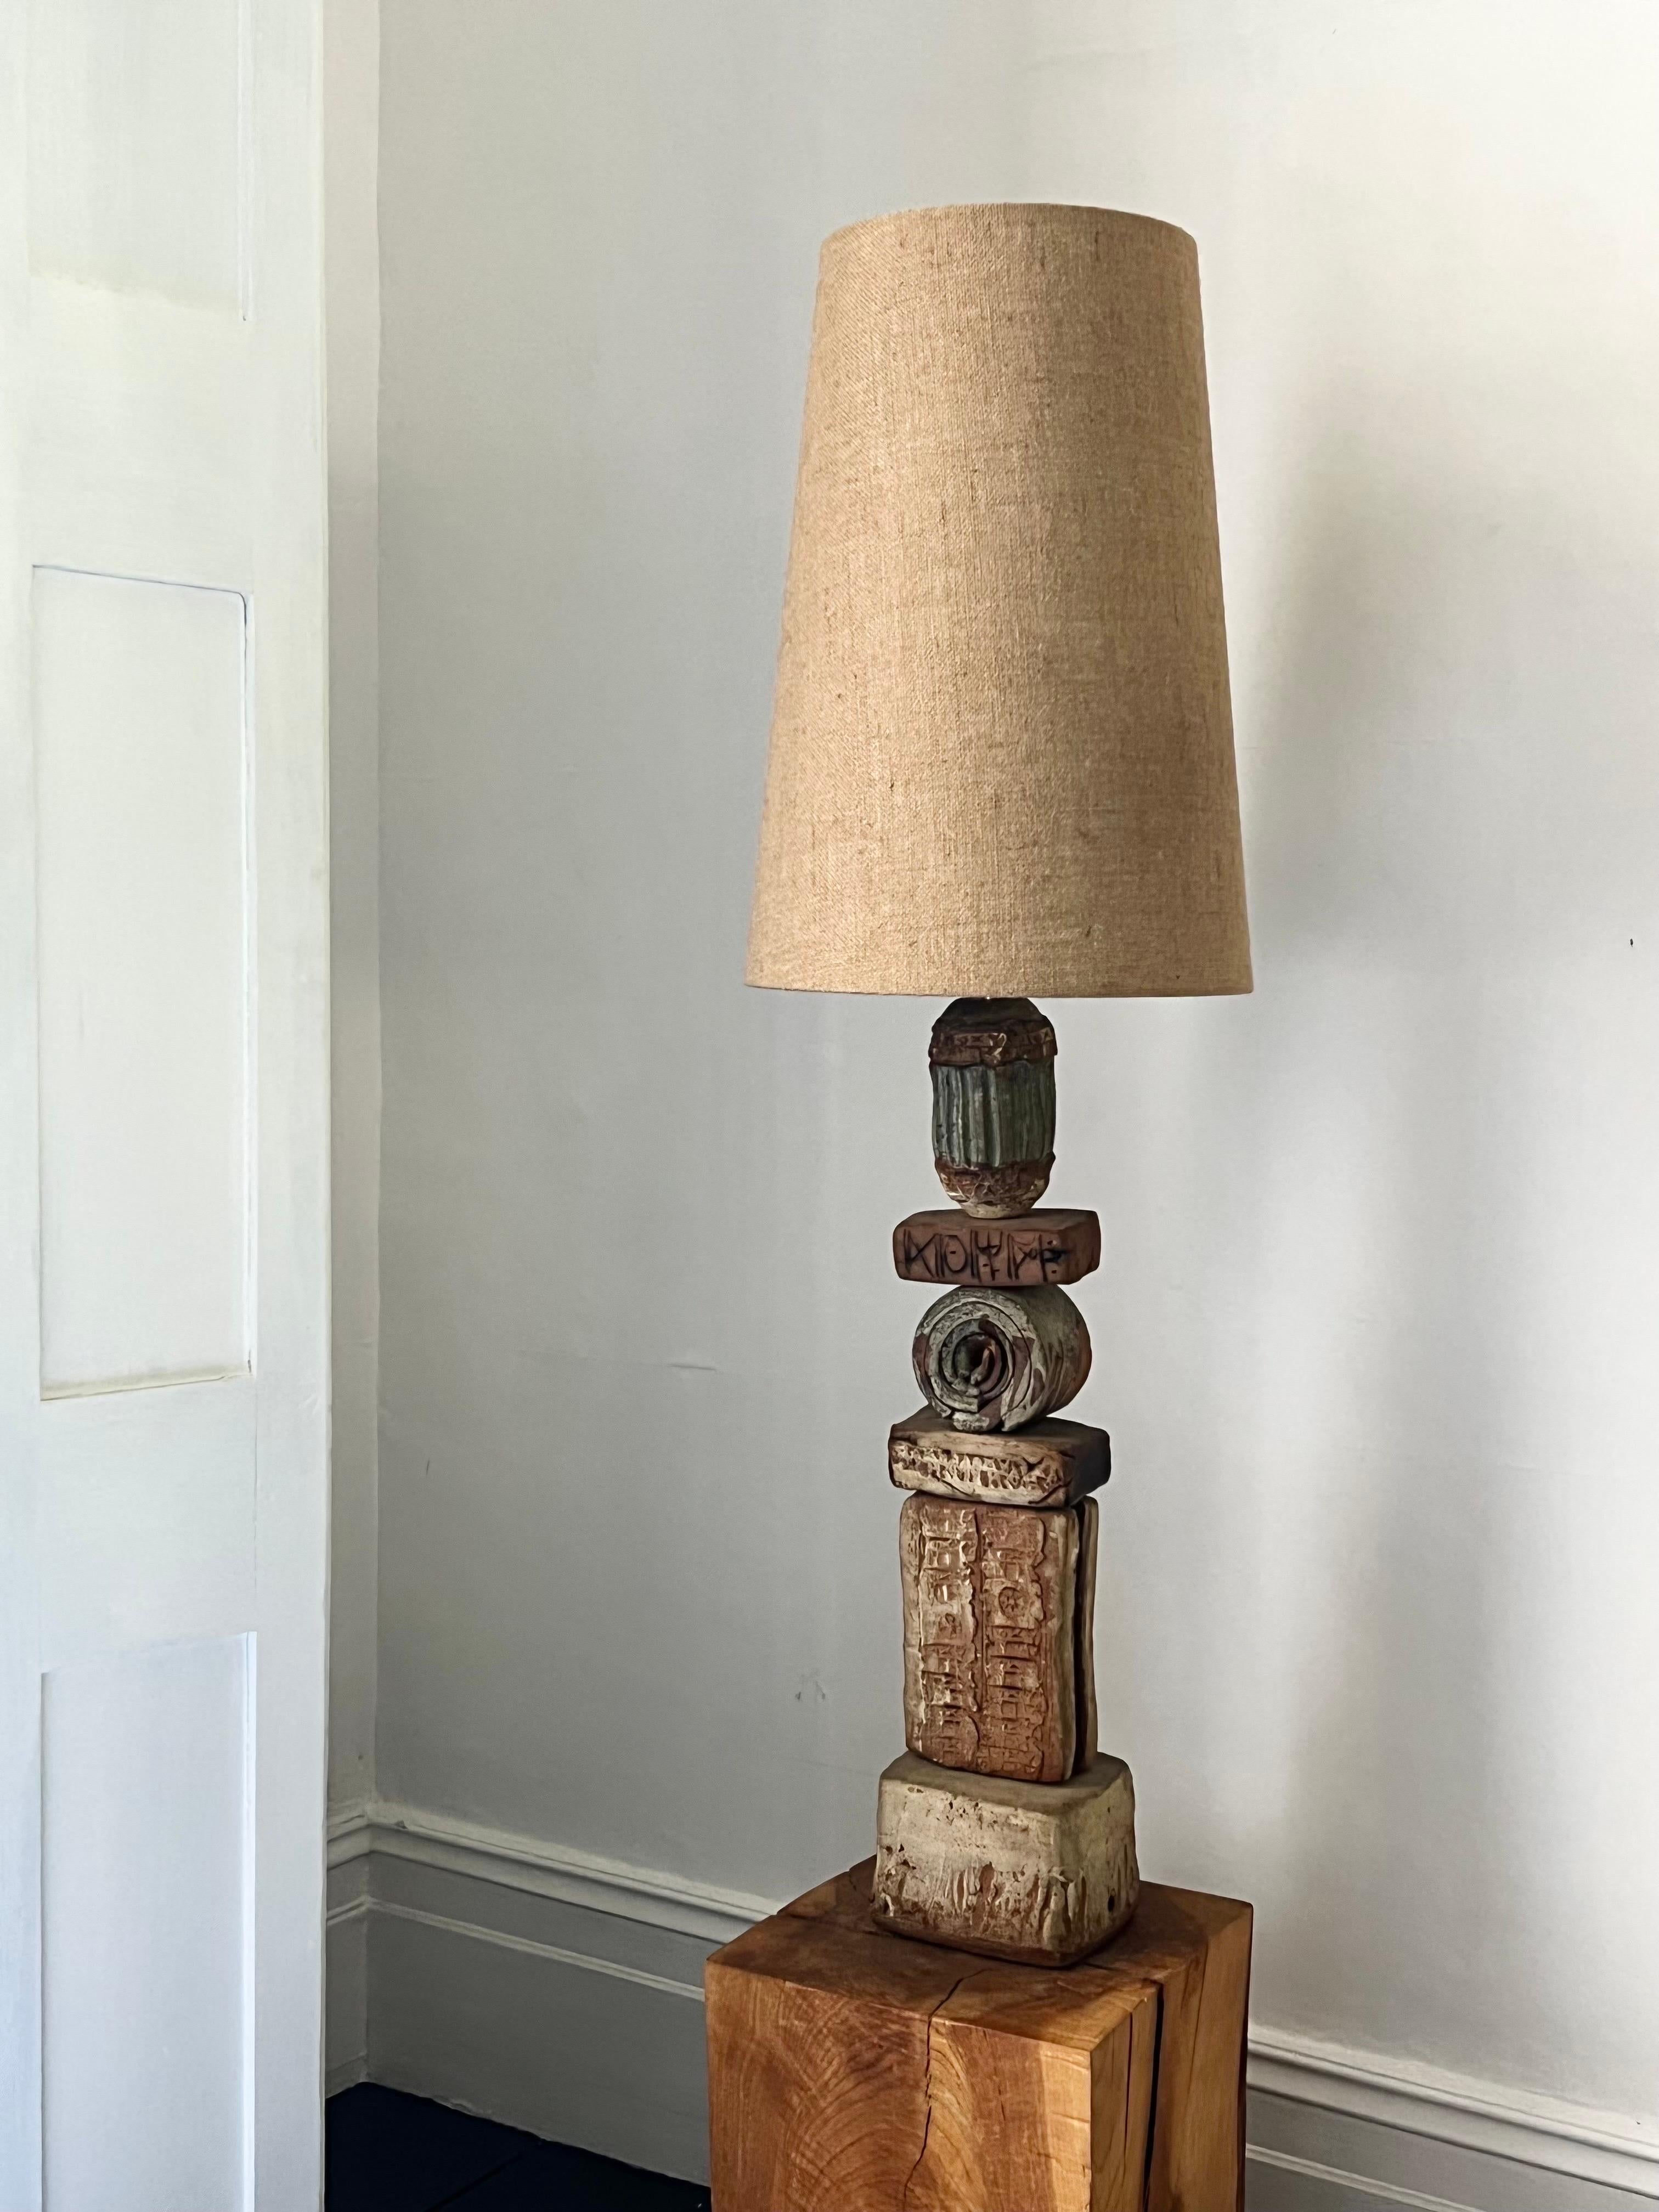 A large, or oversize, ceramic TOTEM table lamp by Bernard Rooke, England. 

This design is an early example of Rooke's work, probably 1960s. A sculptural piece, made of hand-made ceramic elements in natural tones of terracotta and stone, with a